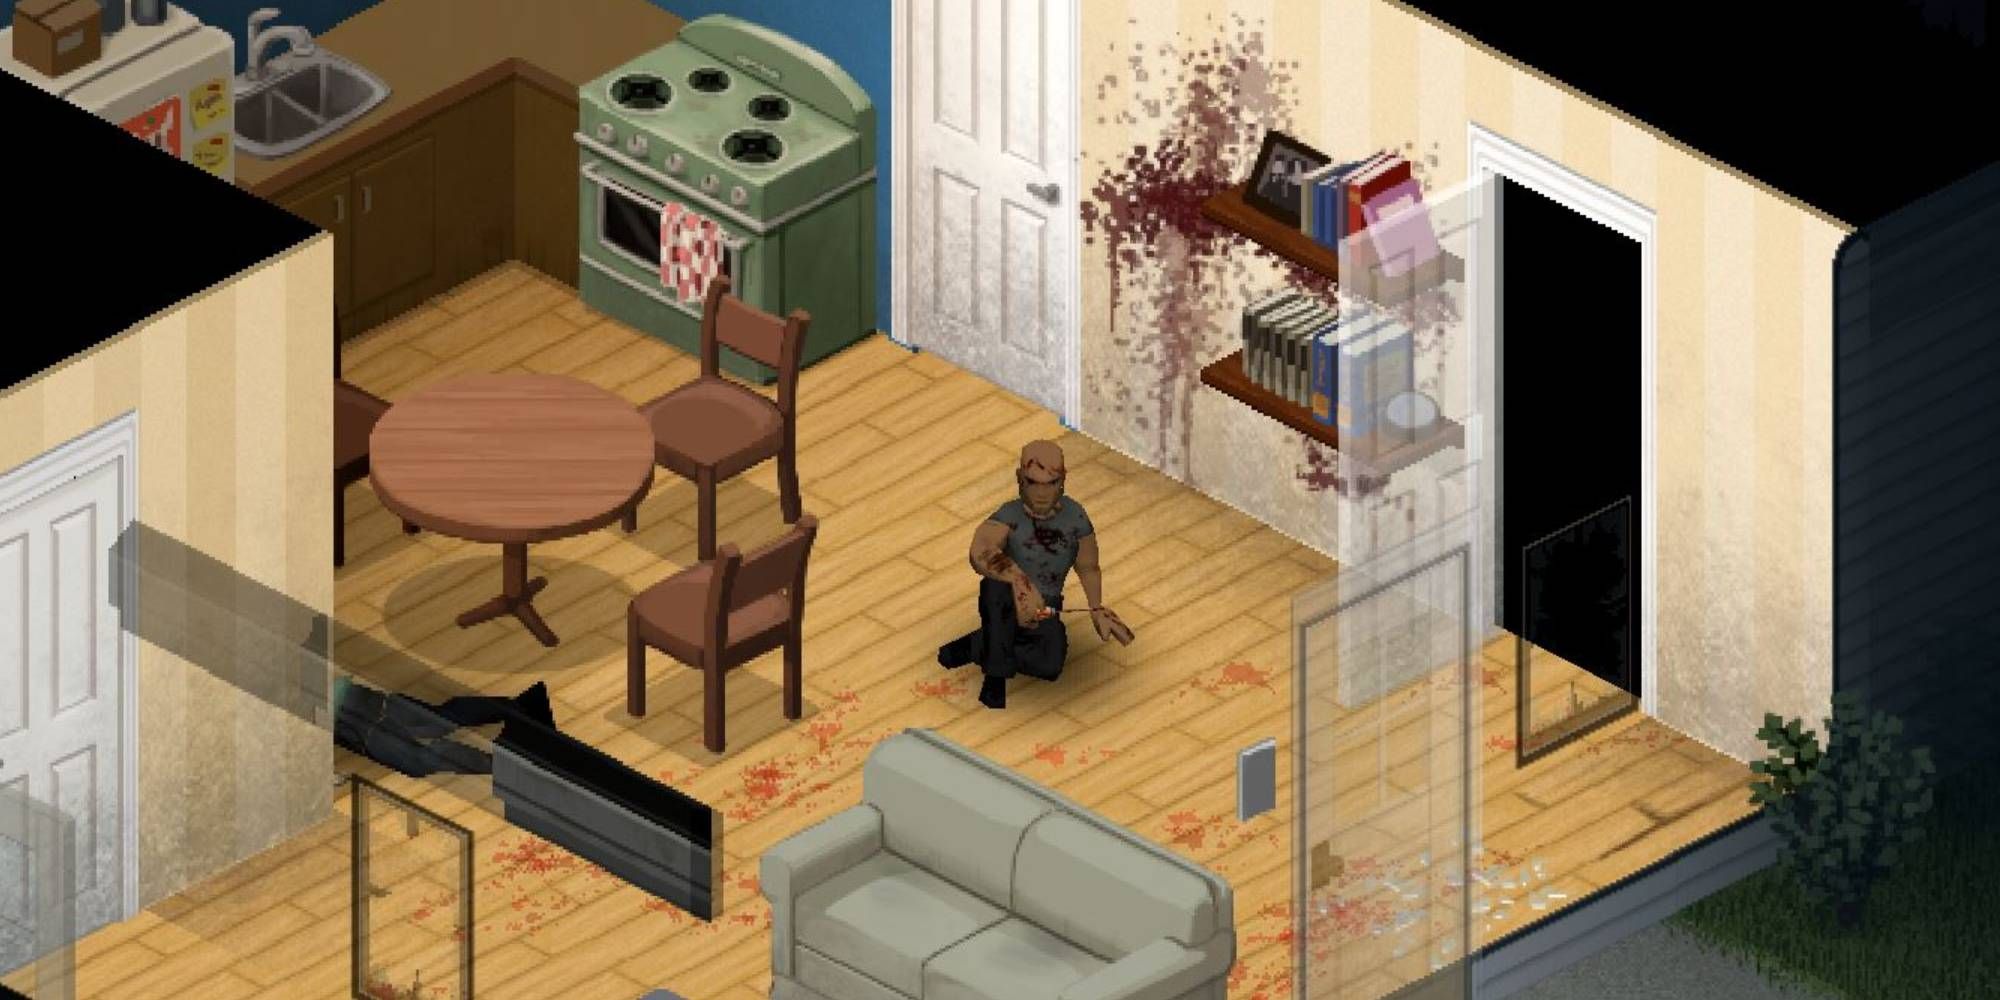 A bloodied figure sitting down in a messy home